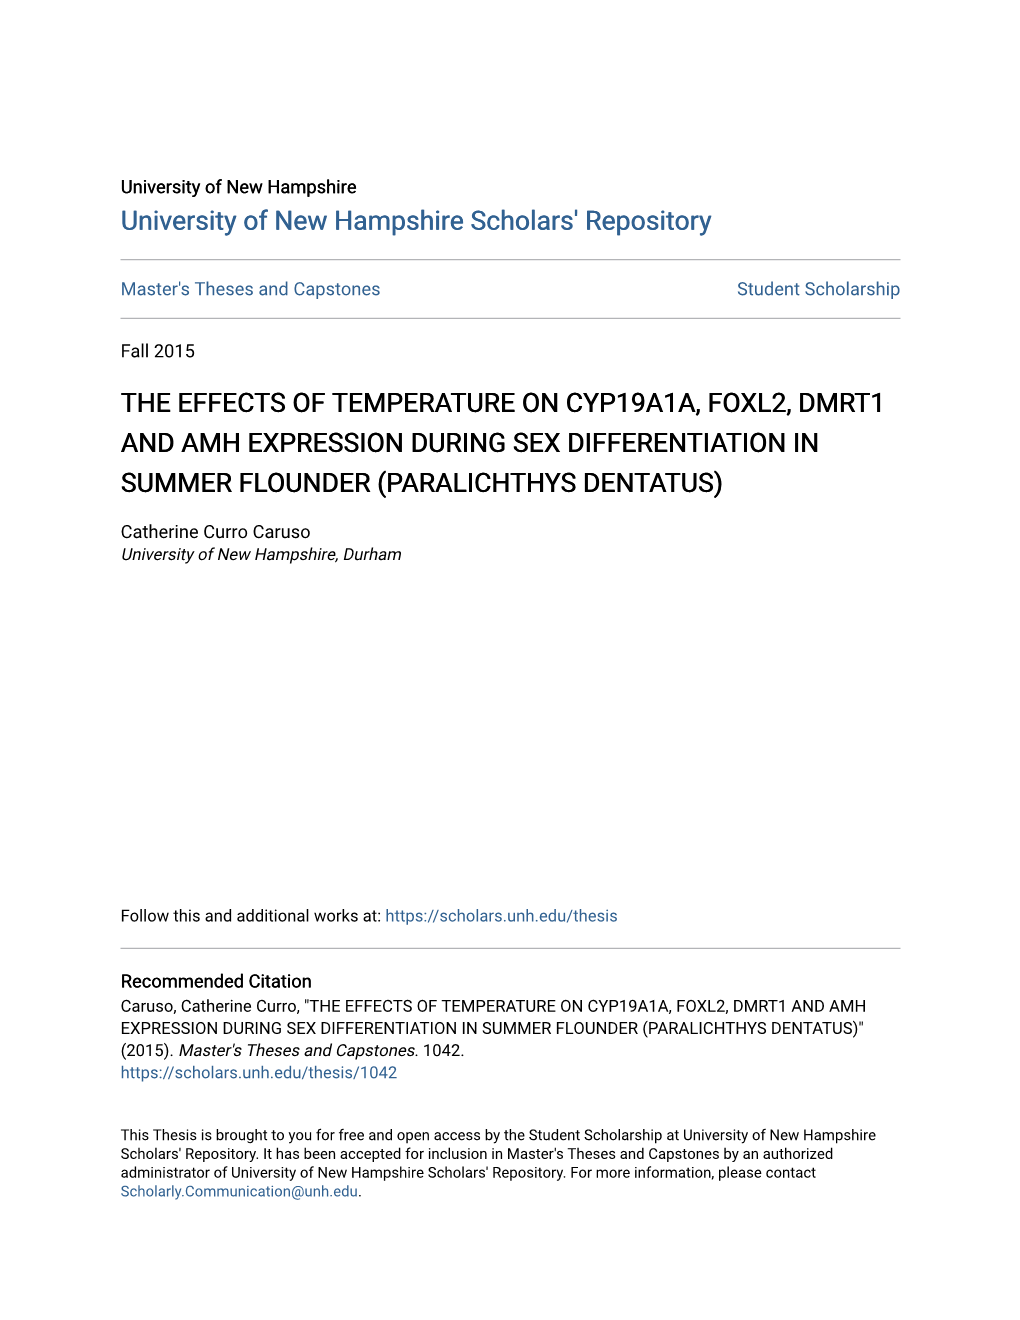 The Effects of Temperature on Cyp19a1a, Foxl2, Dmrt1 and Amh Expression During Sex Differentiation in Summer Flounder (Paralichthys Dentatus)